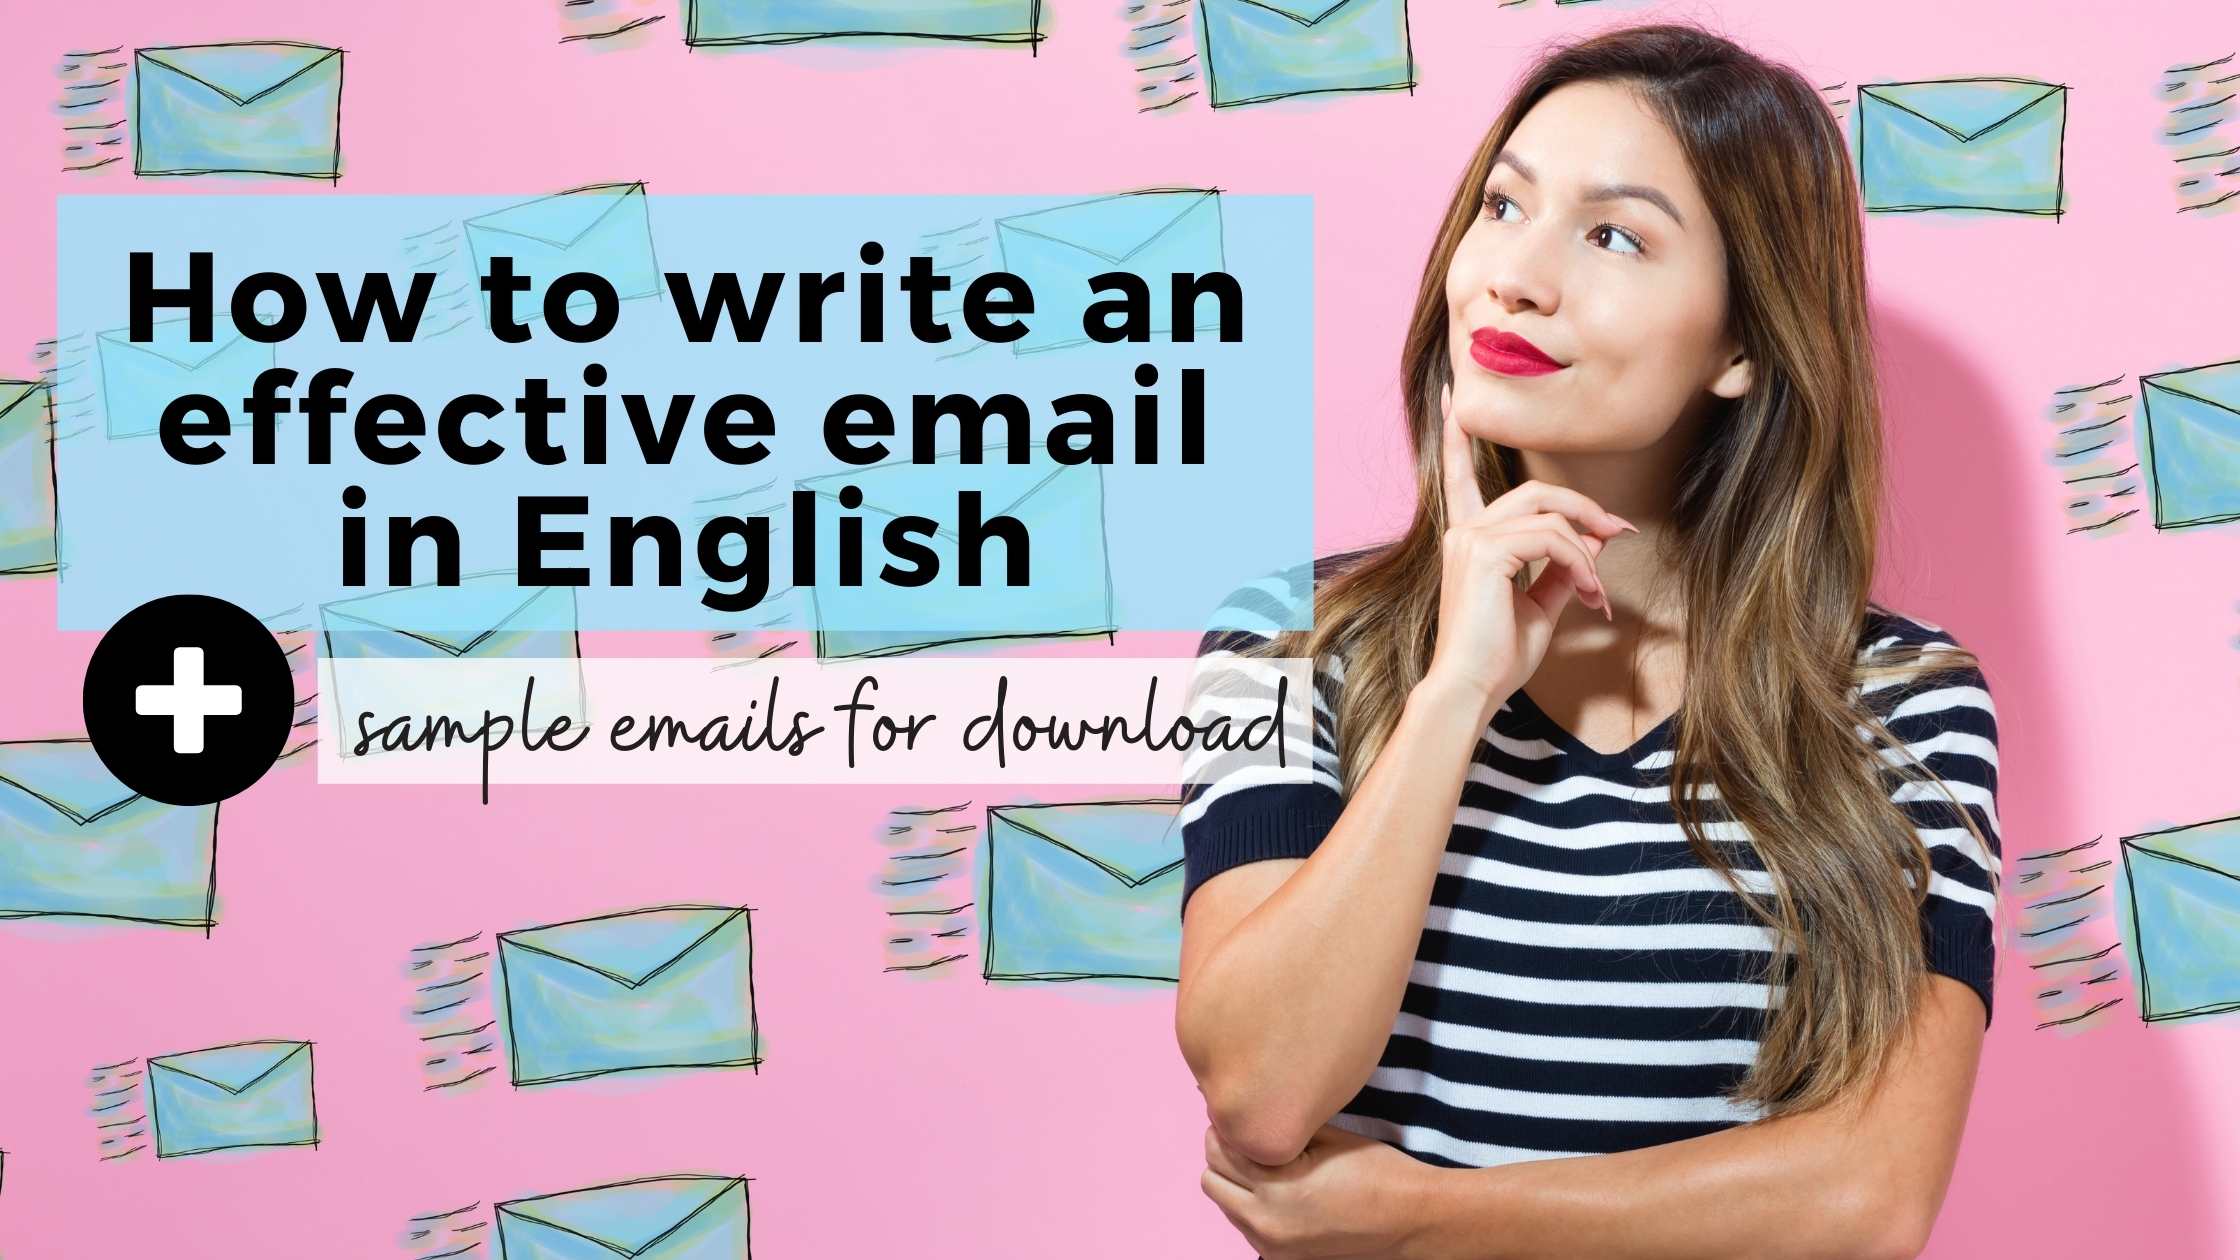 Email writing - Learn advance English